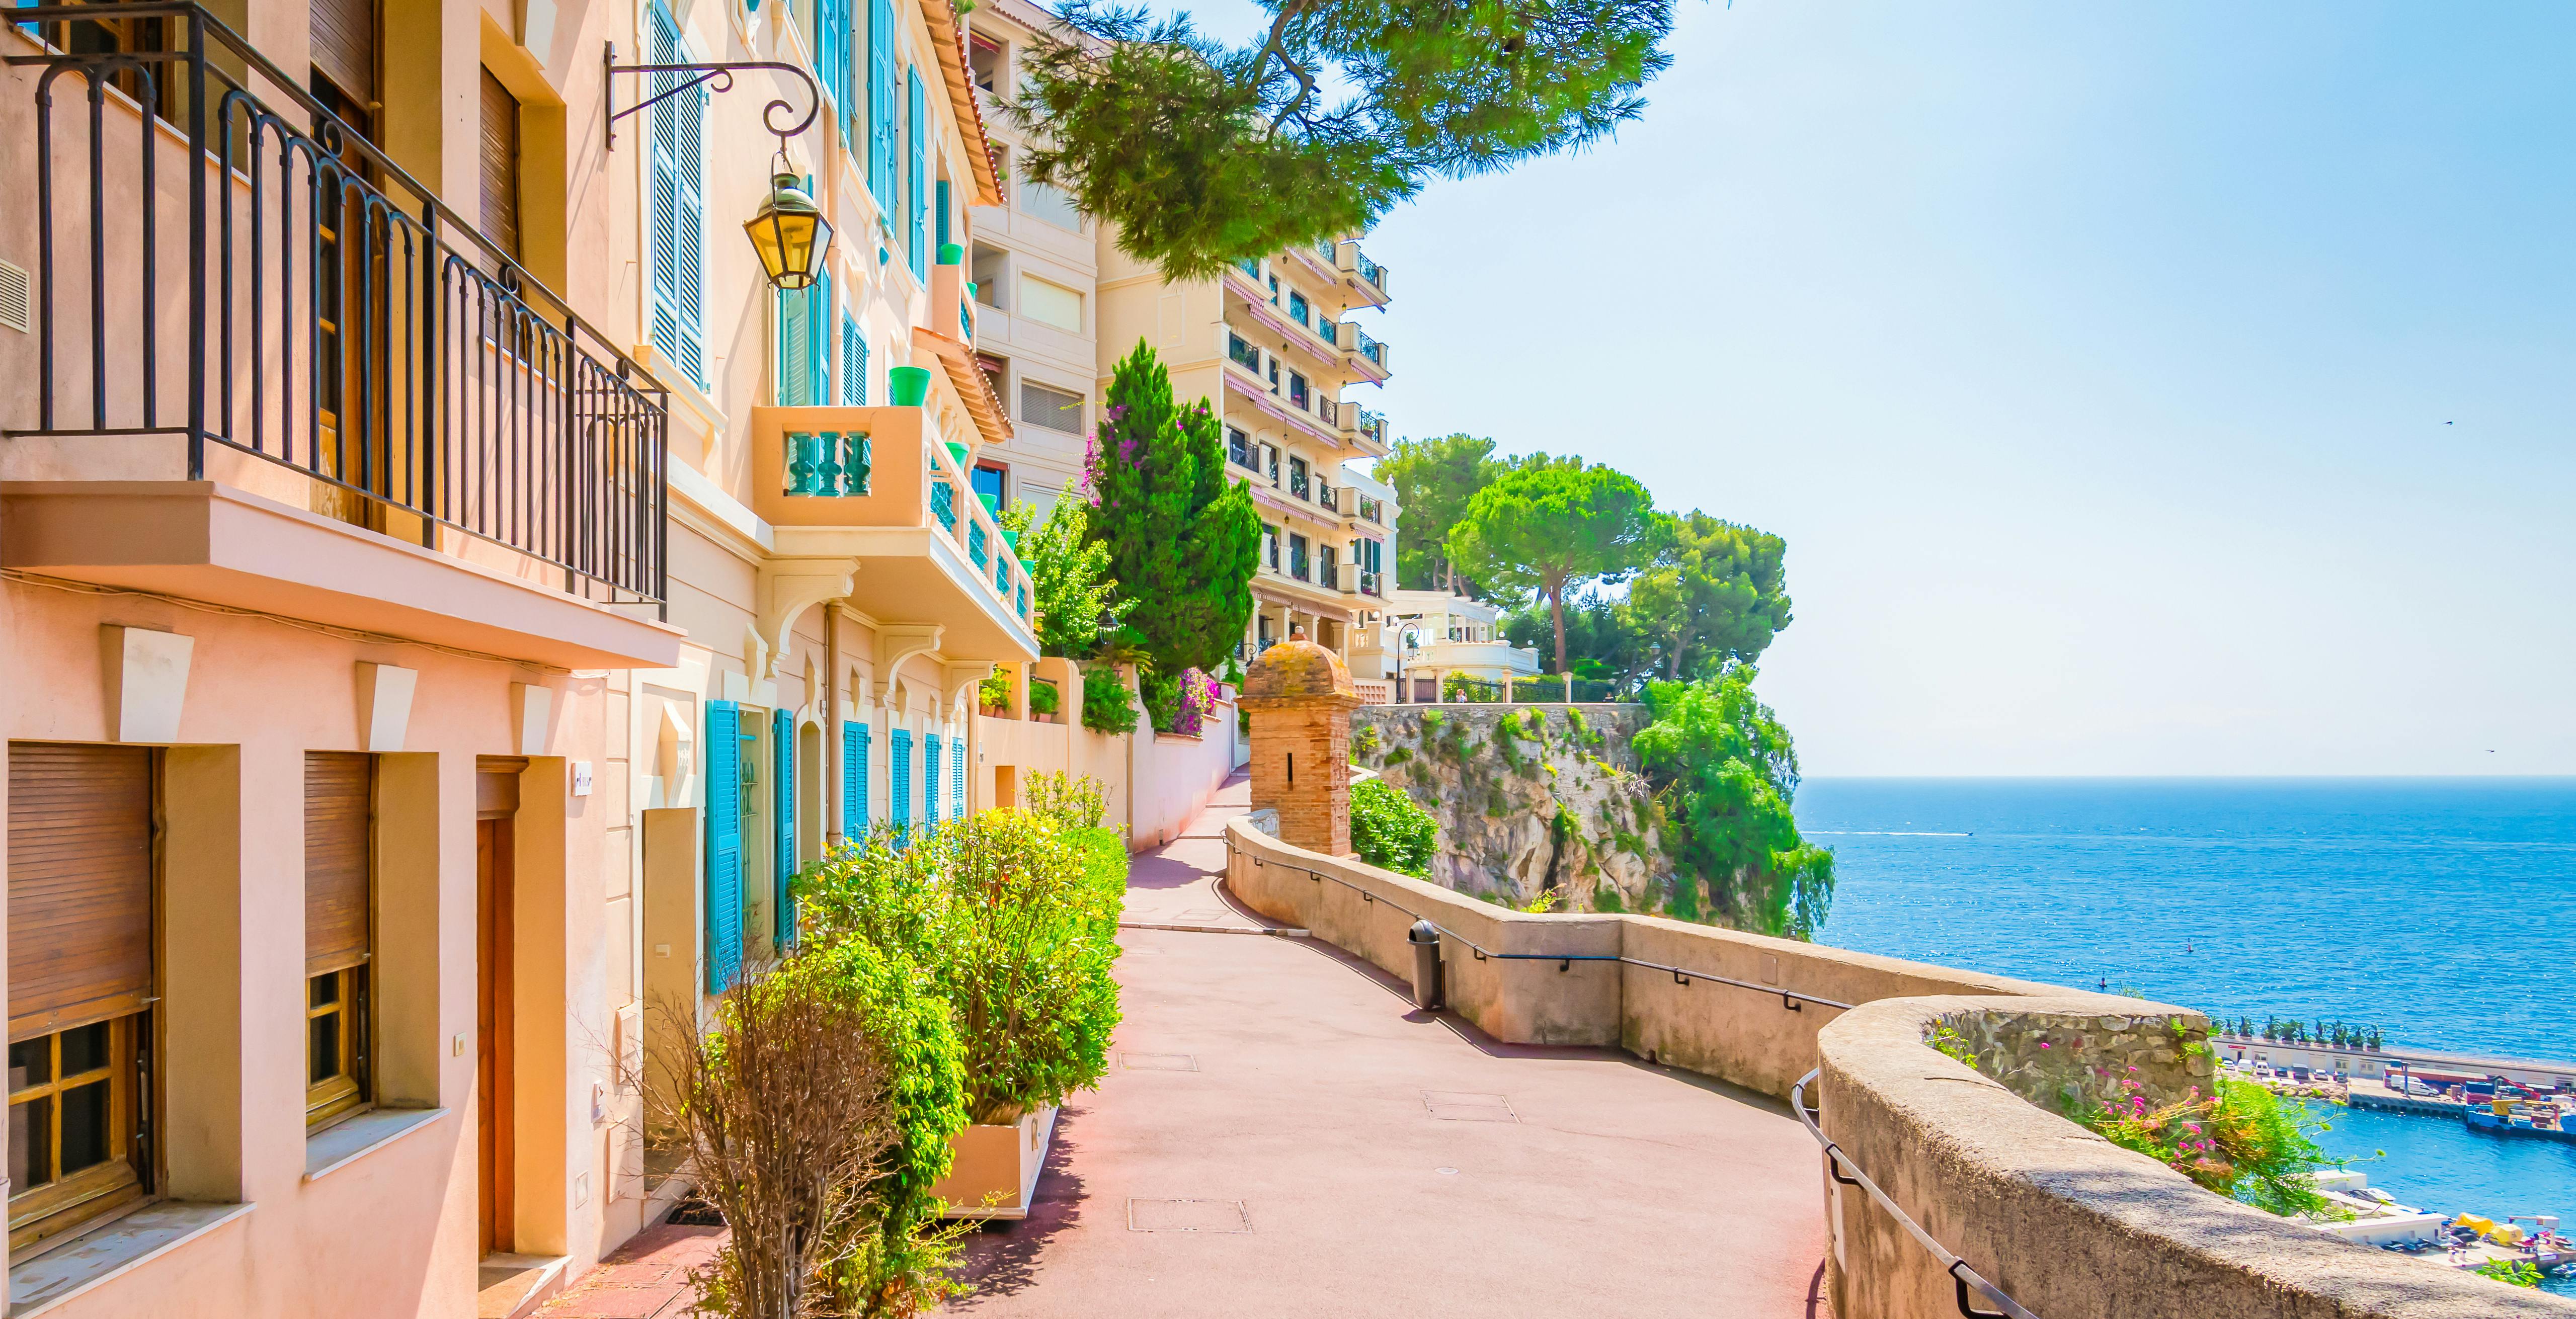 Eze Monaco & Monte-Carlo half-day shared tour from Nice Musement